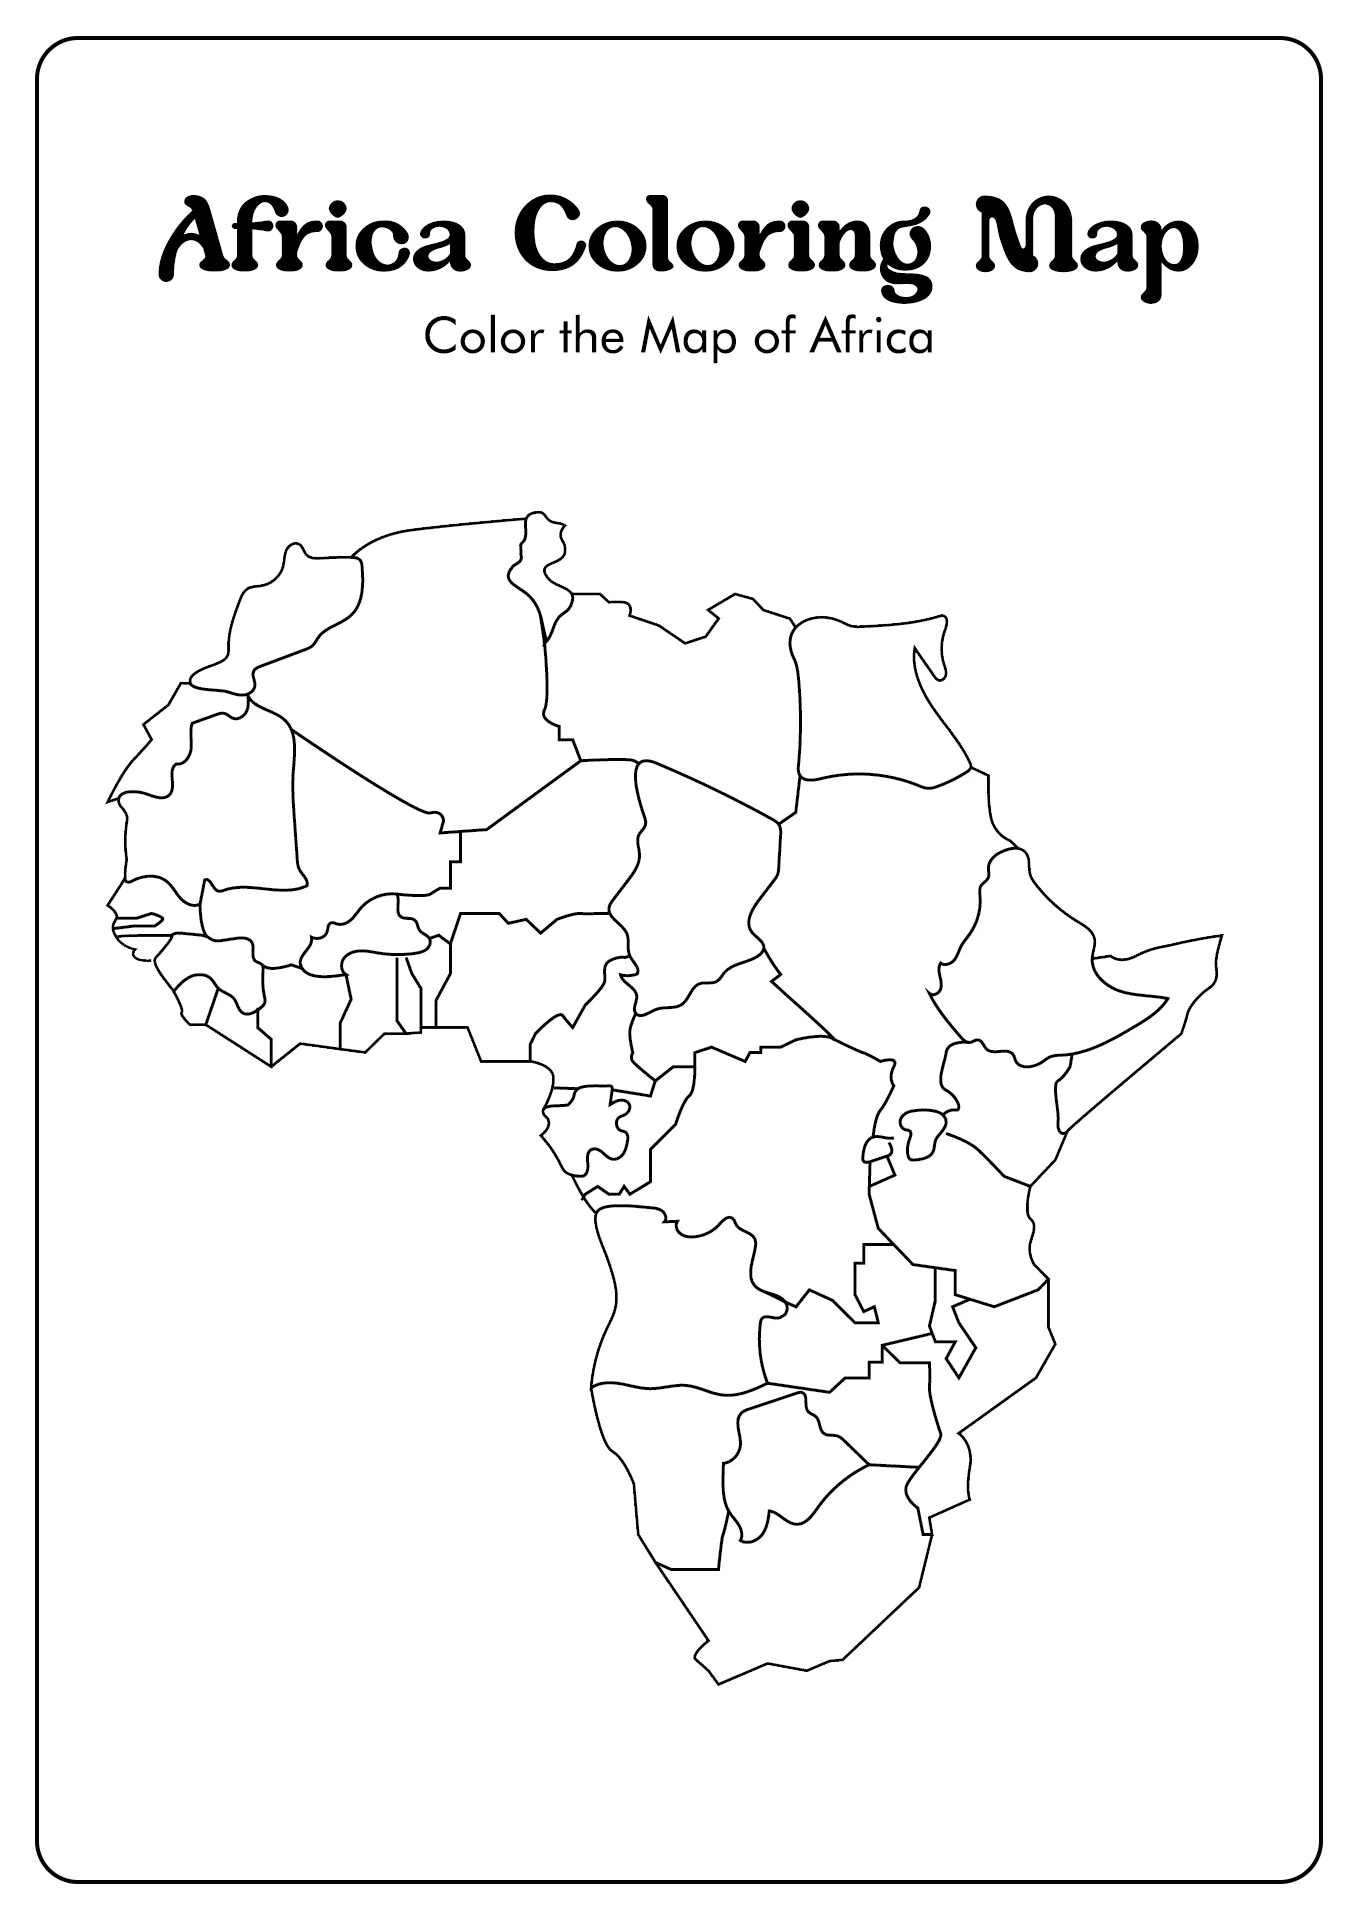 Africa Coloring Map Image